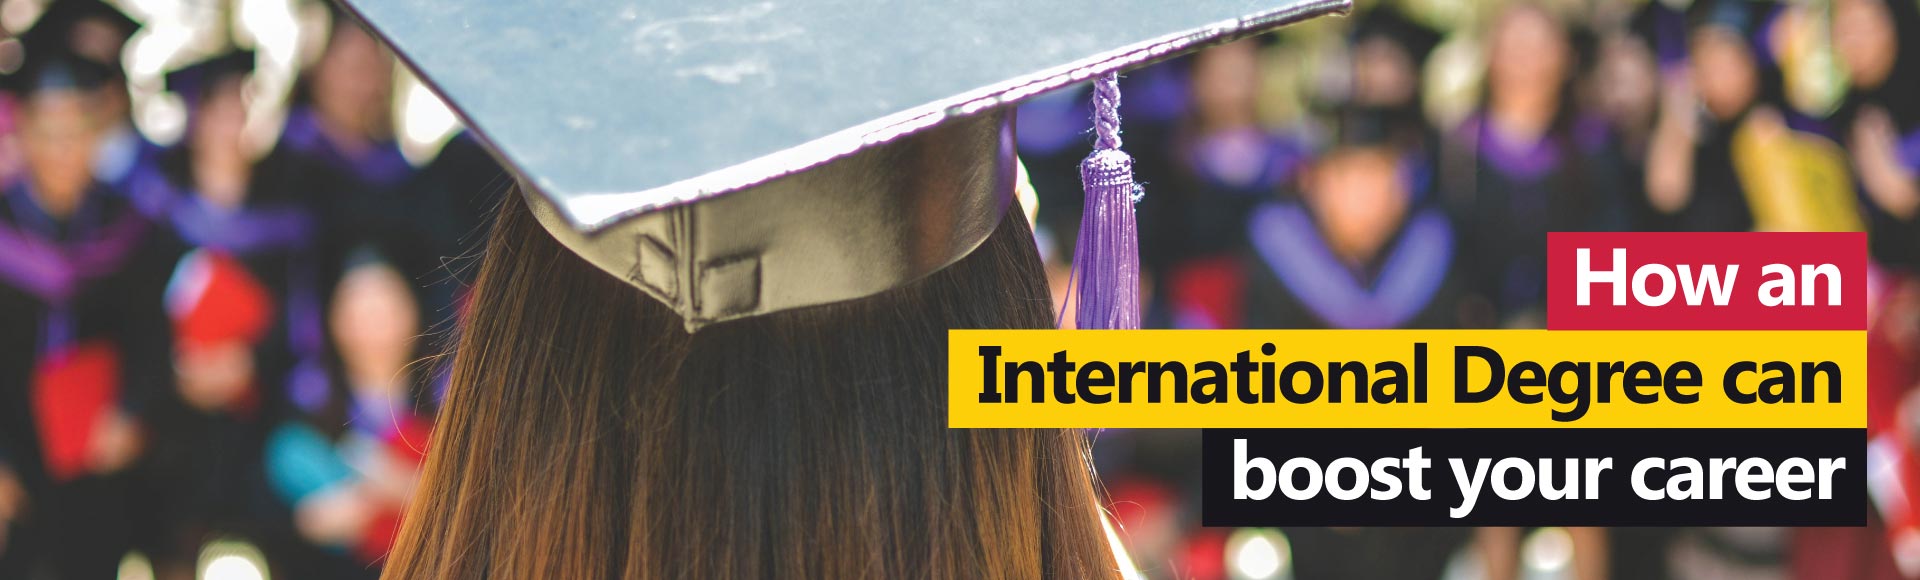 How an International Degree can boost your career?